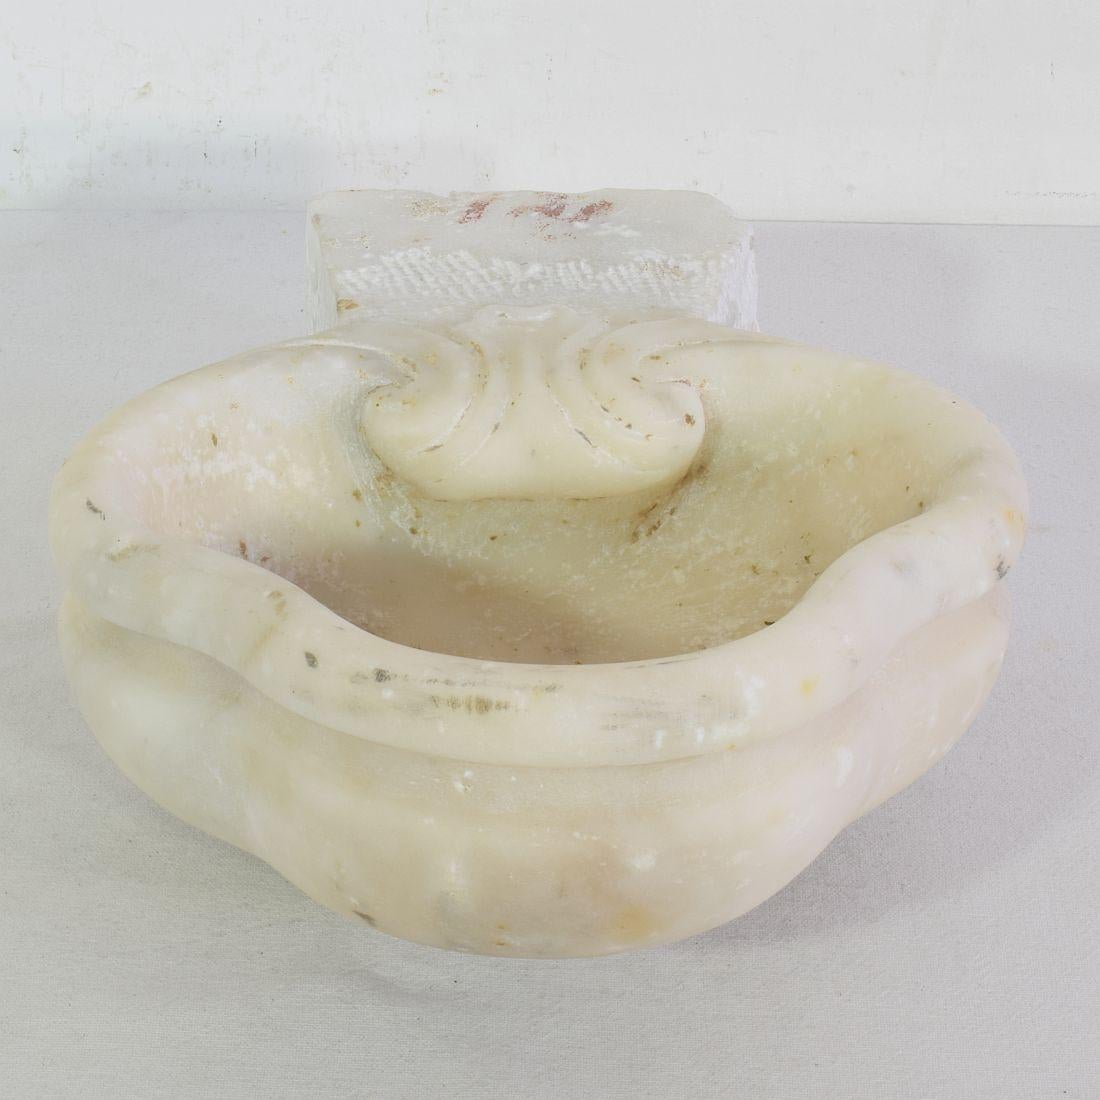 Beautiful Baroque marble holy water font or stoup,
Unique and original period piece. Italy, circa 1650-1750. Weathered condition.
Measures: H:10,5cm W:21,5cm D:19-26cm.